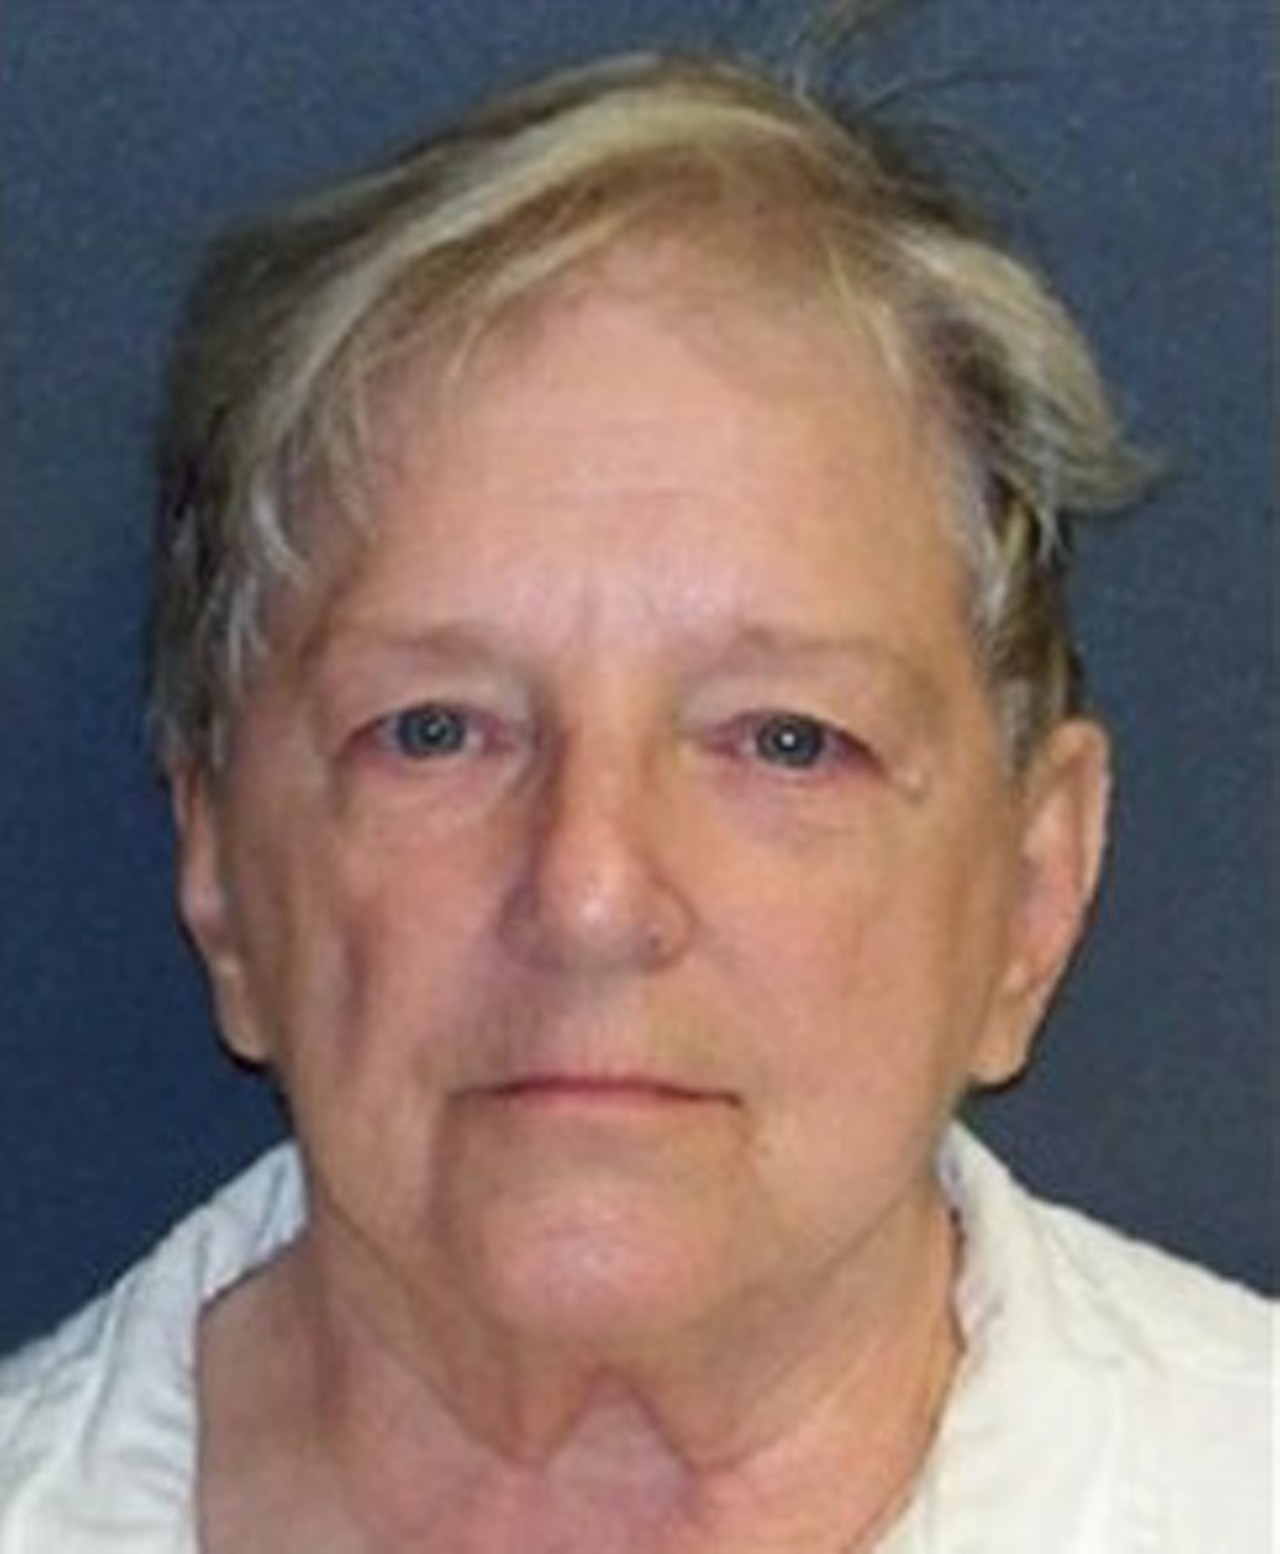 The Angel of Death
Today, Genene Jones sits in jail as a woman in her late 60s. Thirty years ago, she was a young nurse that used her profession to kill innocent babies, injecting them with a variety of drugs. Nicknamed the “Angel of Death,” Jones is suspected of murdering about 42 infants under her care, though she has only been convicted for killing a baby girl at a Kerrville clinic. She was originally sentenced to 99 years in prison, but recent district attorneys have made it a point to keep her behind bars despite her parole by charging her with other infant deaths.
Photo via Texas Department of Justice